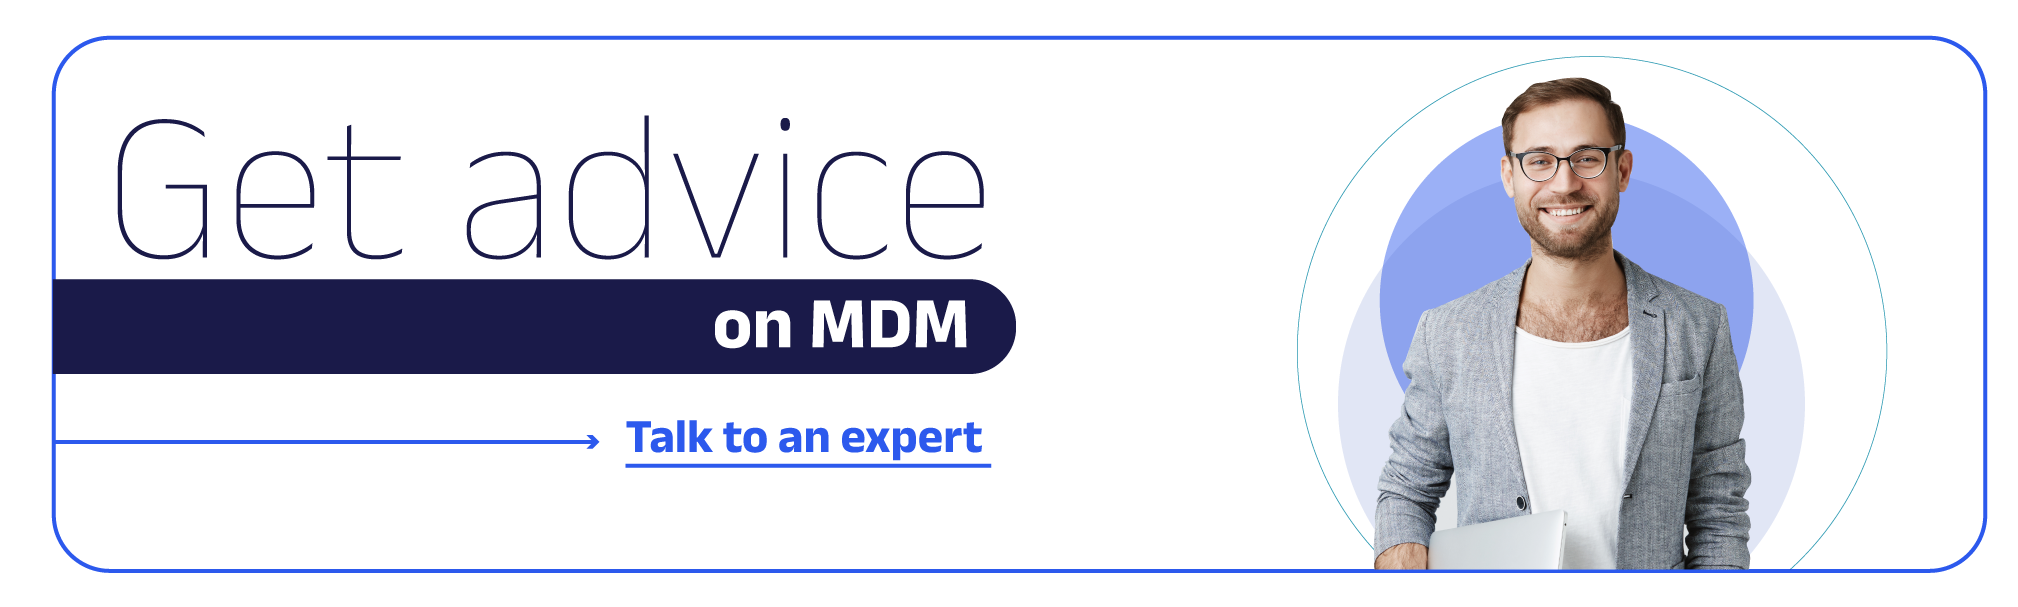 talk to an expert to get advice on MDM